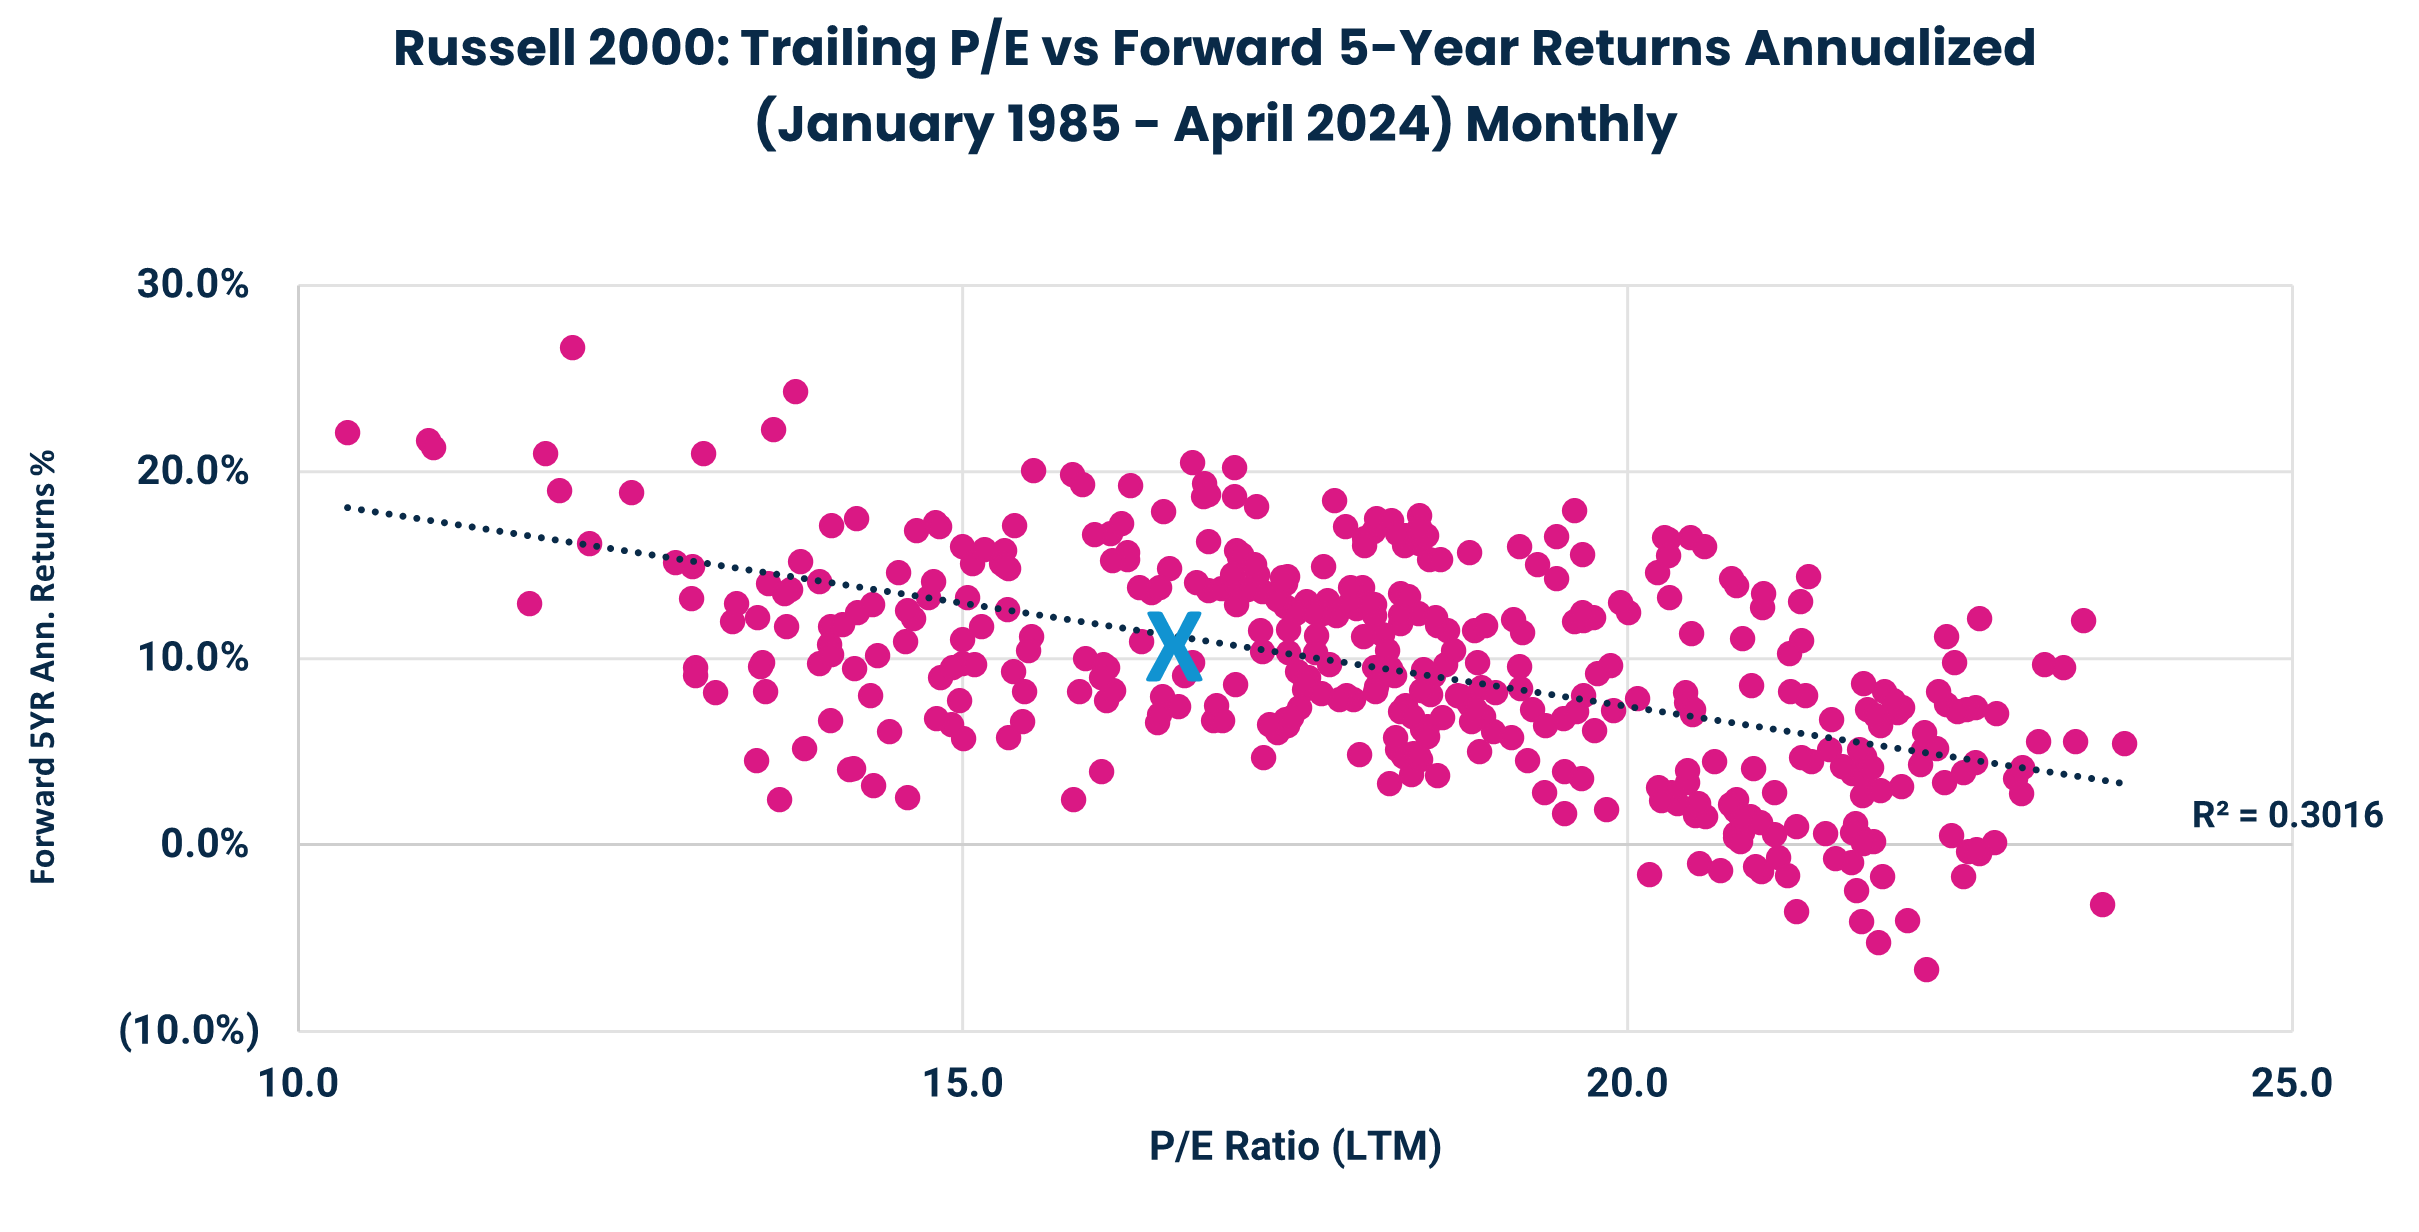 Russell 2000: Trailing P/E vs Forward 5-Year Returns Annualized
(January 1985 - April 2024) Monthly